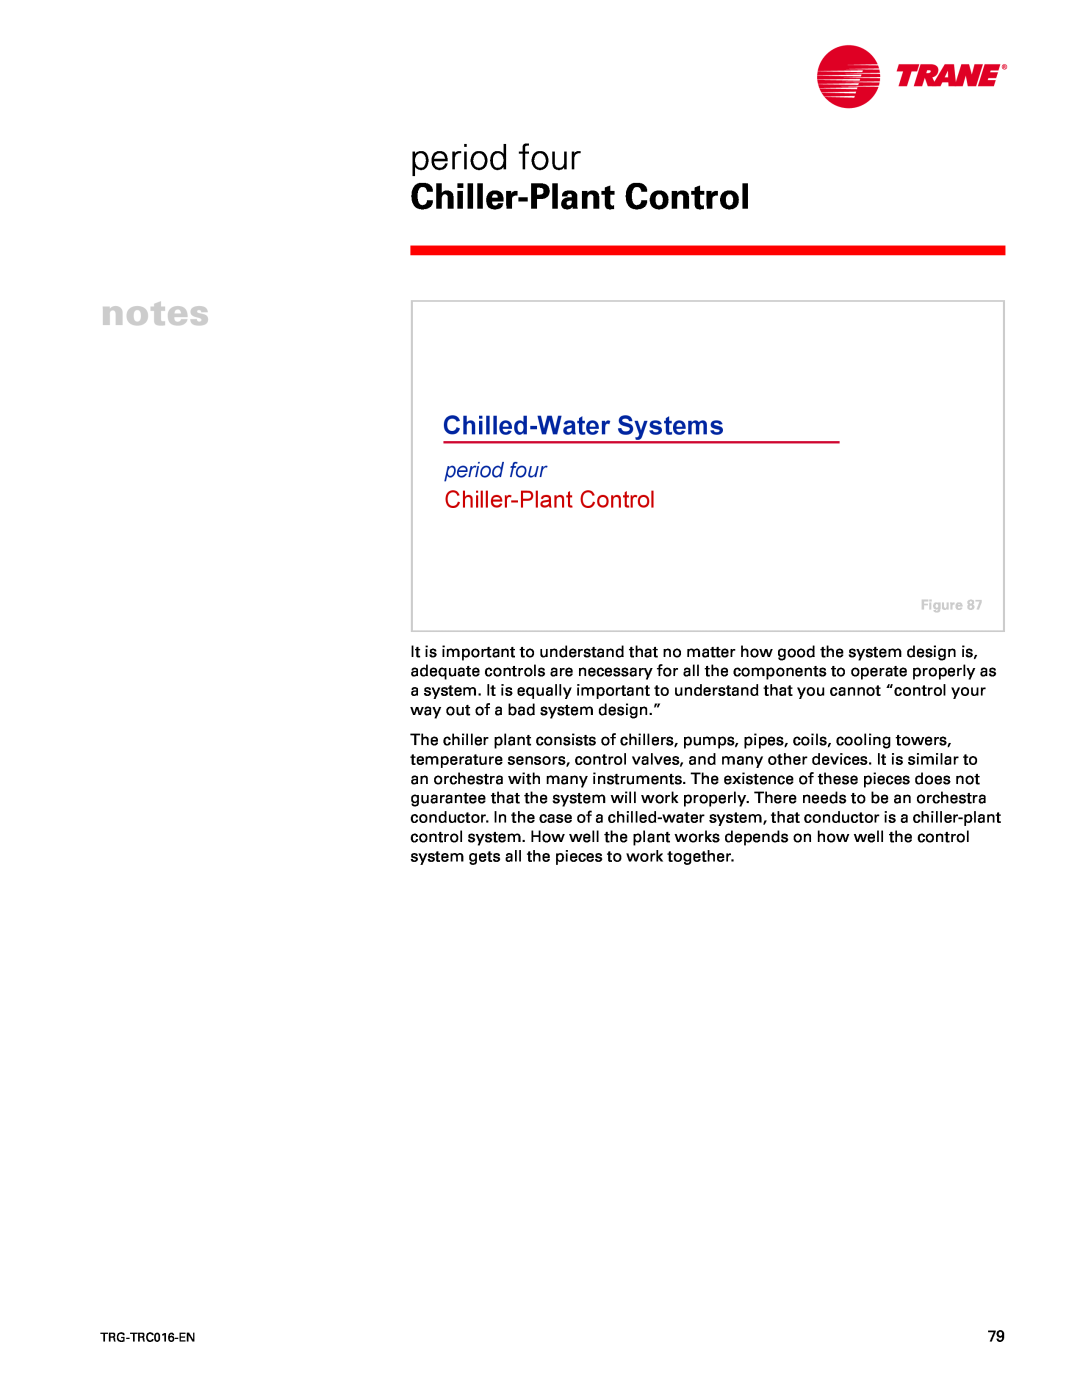 Trane TRG-TRC016-EN manual period four, Chiller-PlantControl, notes, Chilled-WaterSystems 